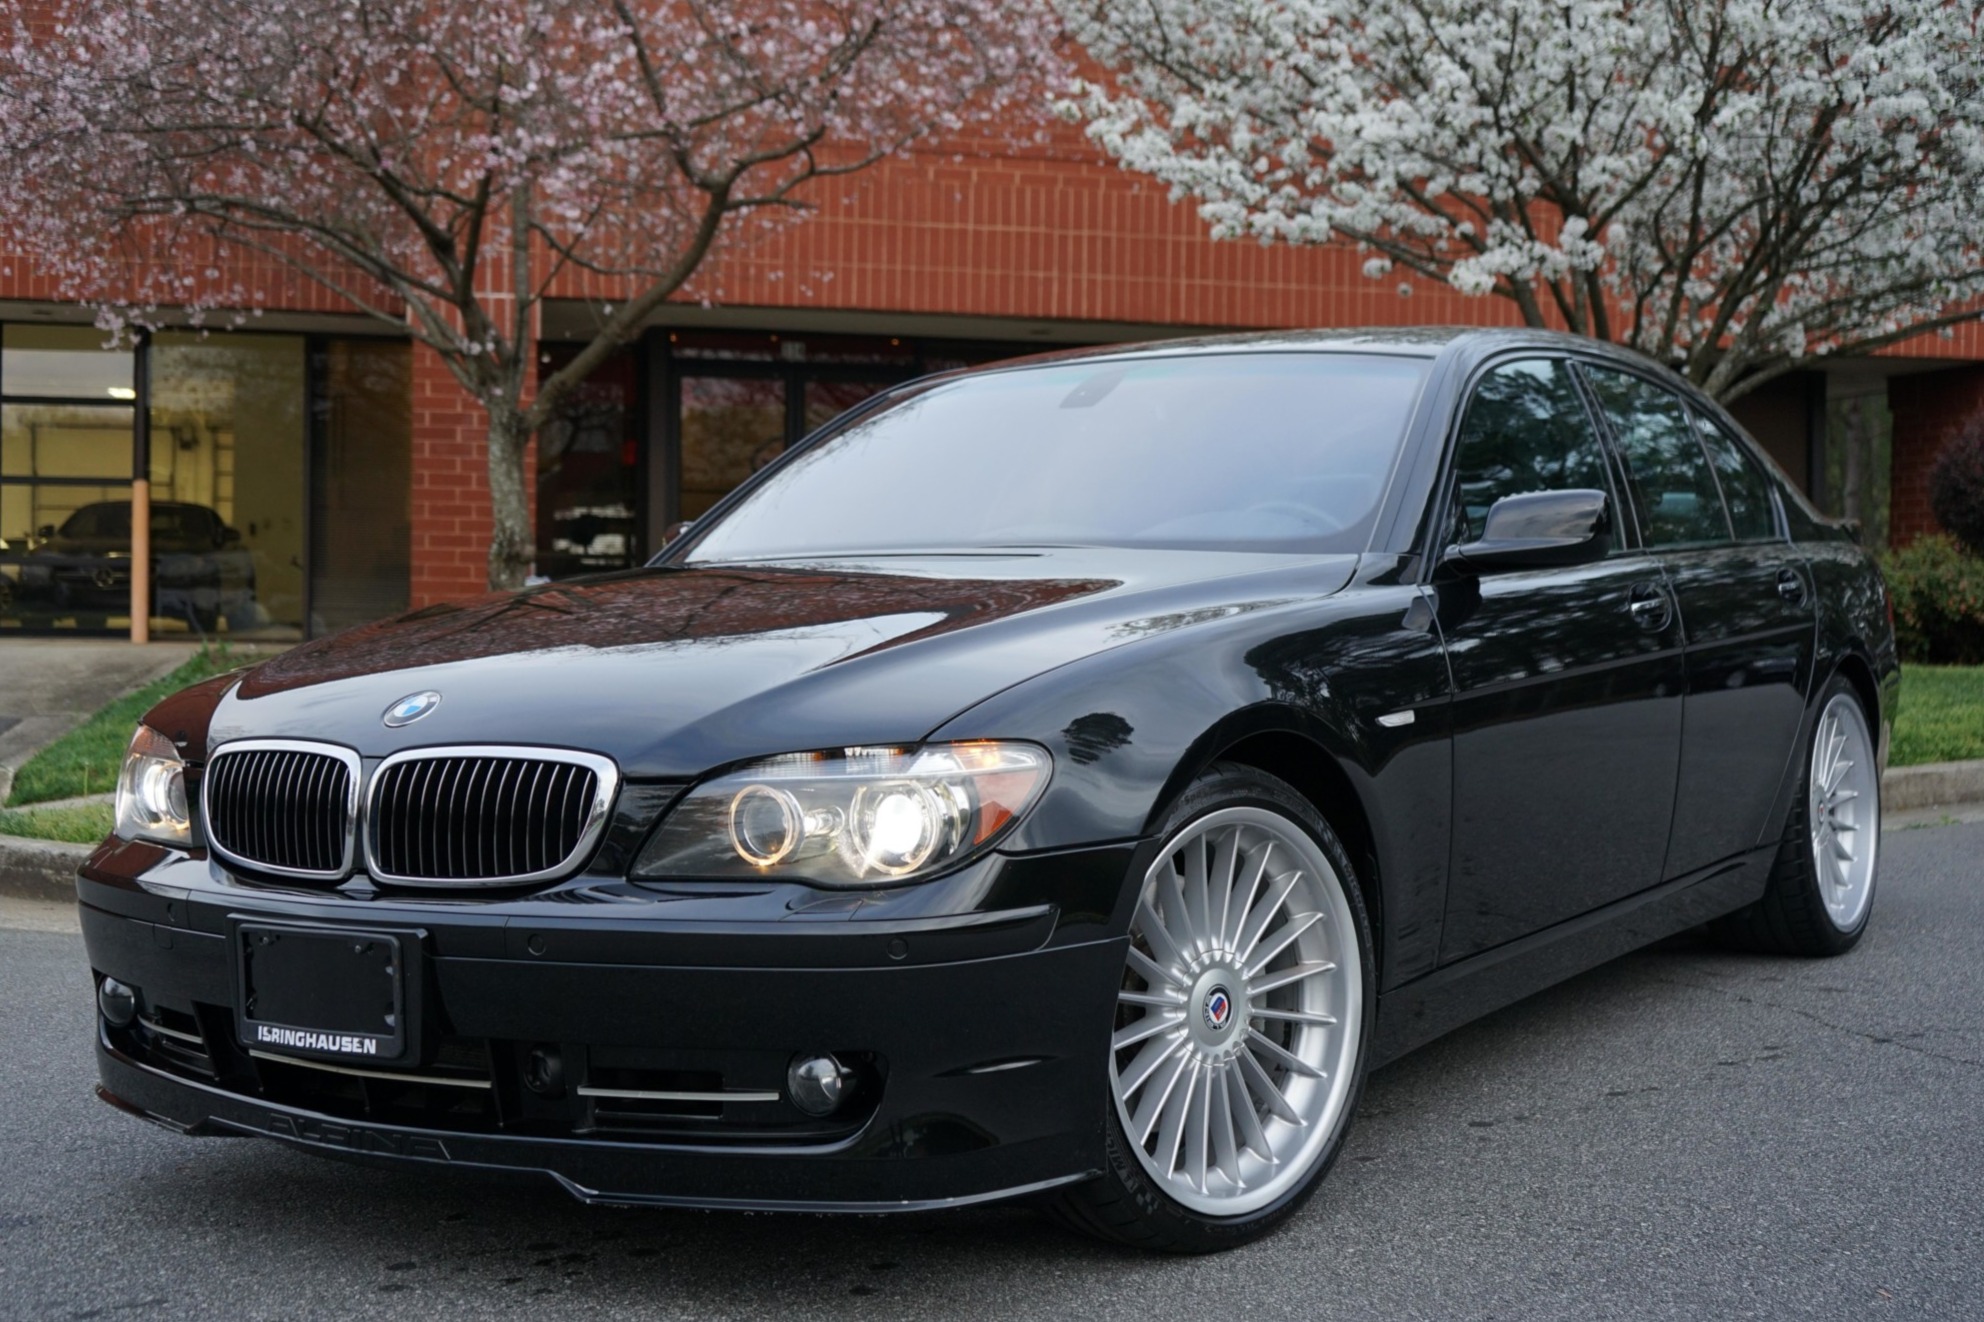 No Reserve: 2008 BMW Alpina B7 for sale on BaT Auctions - sold for $31,000  on April 1, 2020 (Lot #29,667) | Bring a Trailer